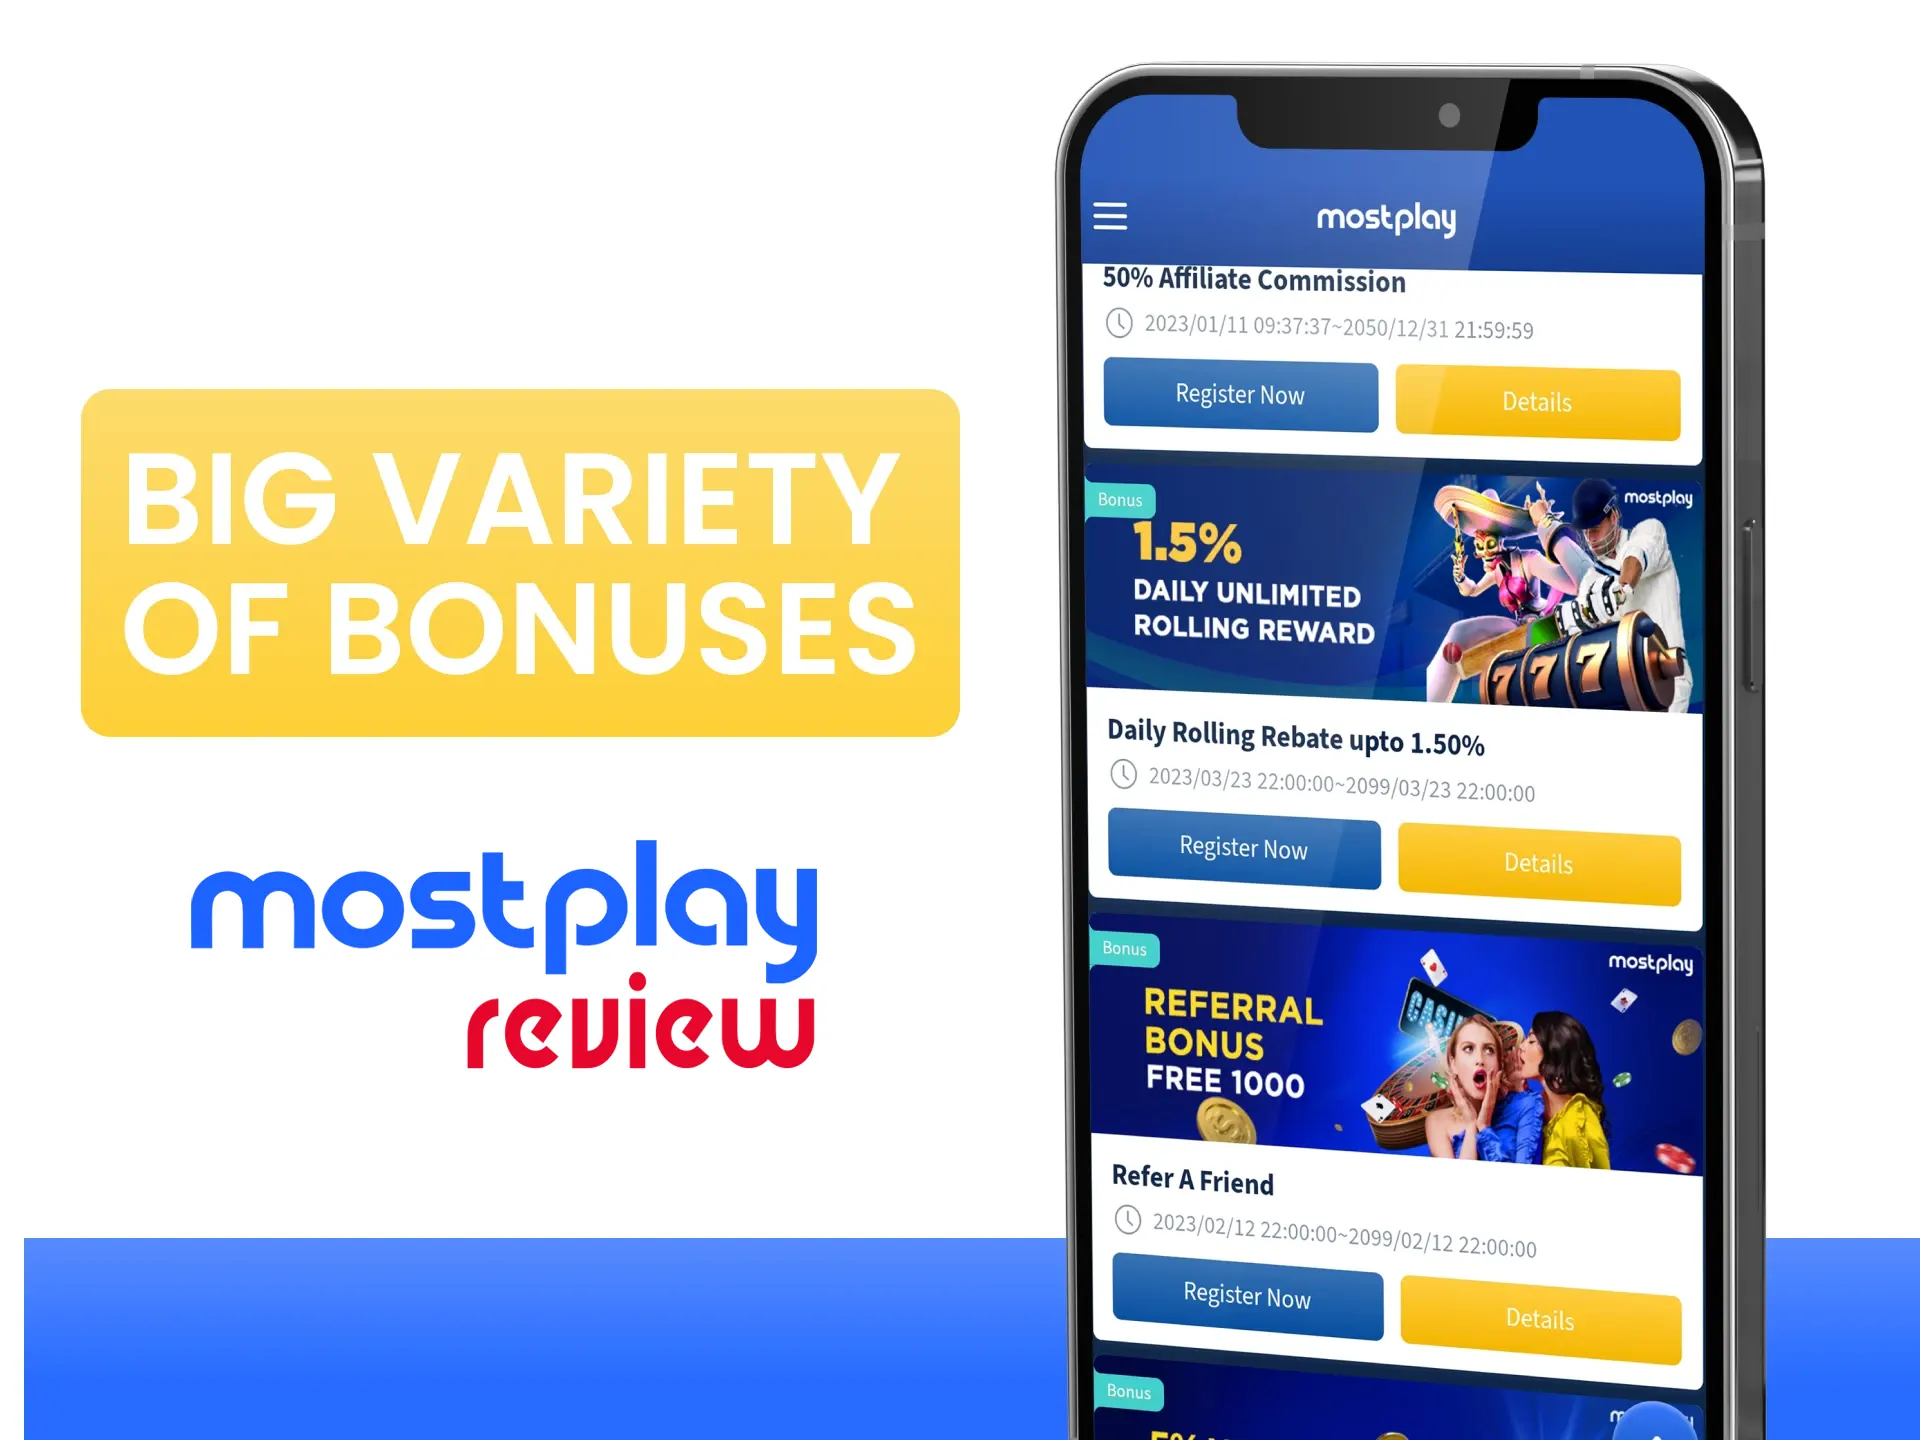 Claim all of the available bonuses on the Mostplay bonus page.